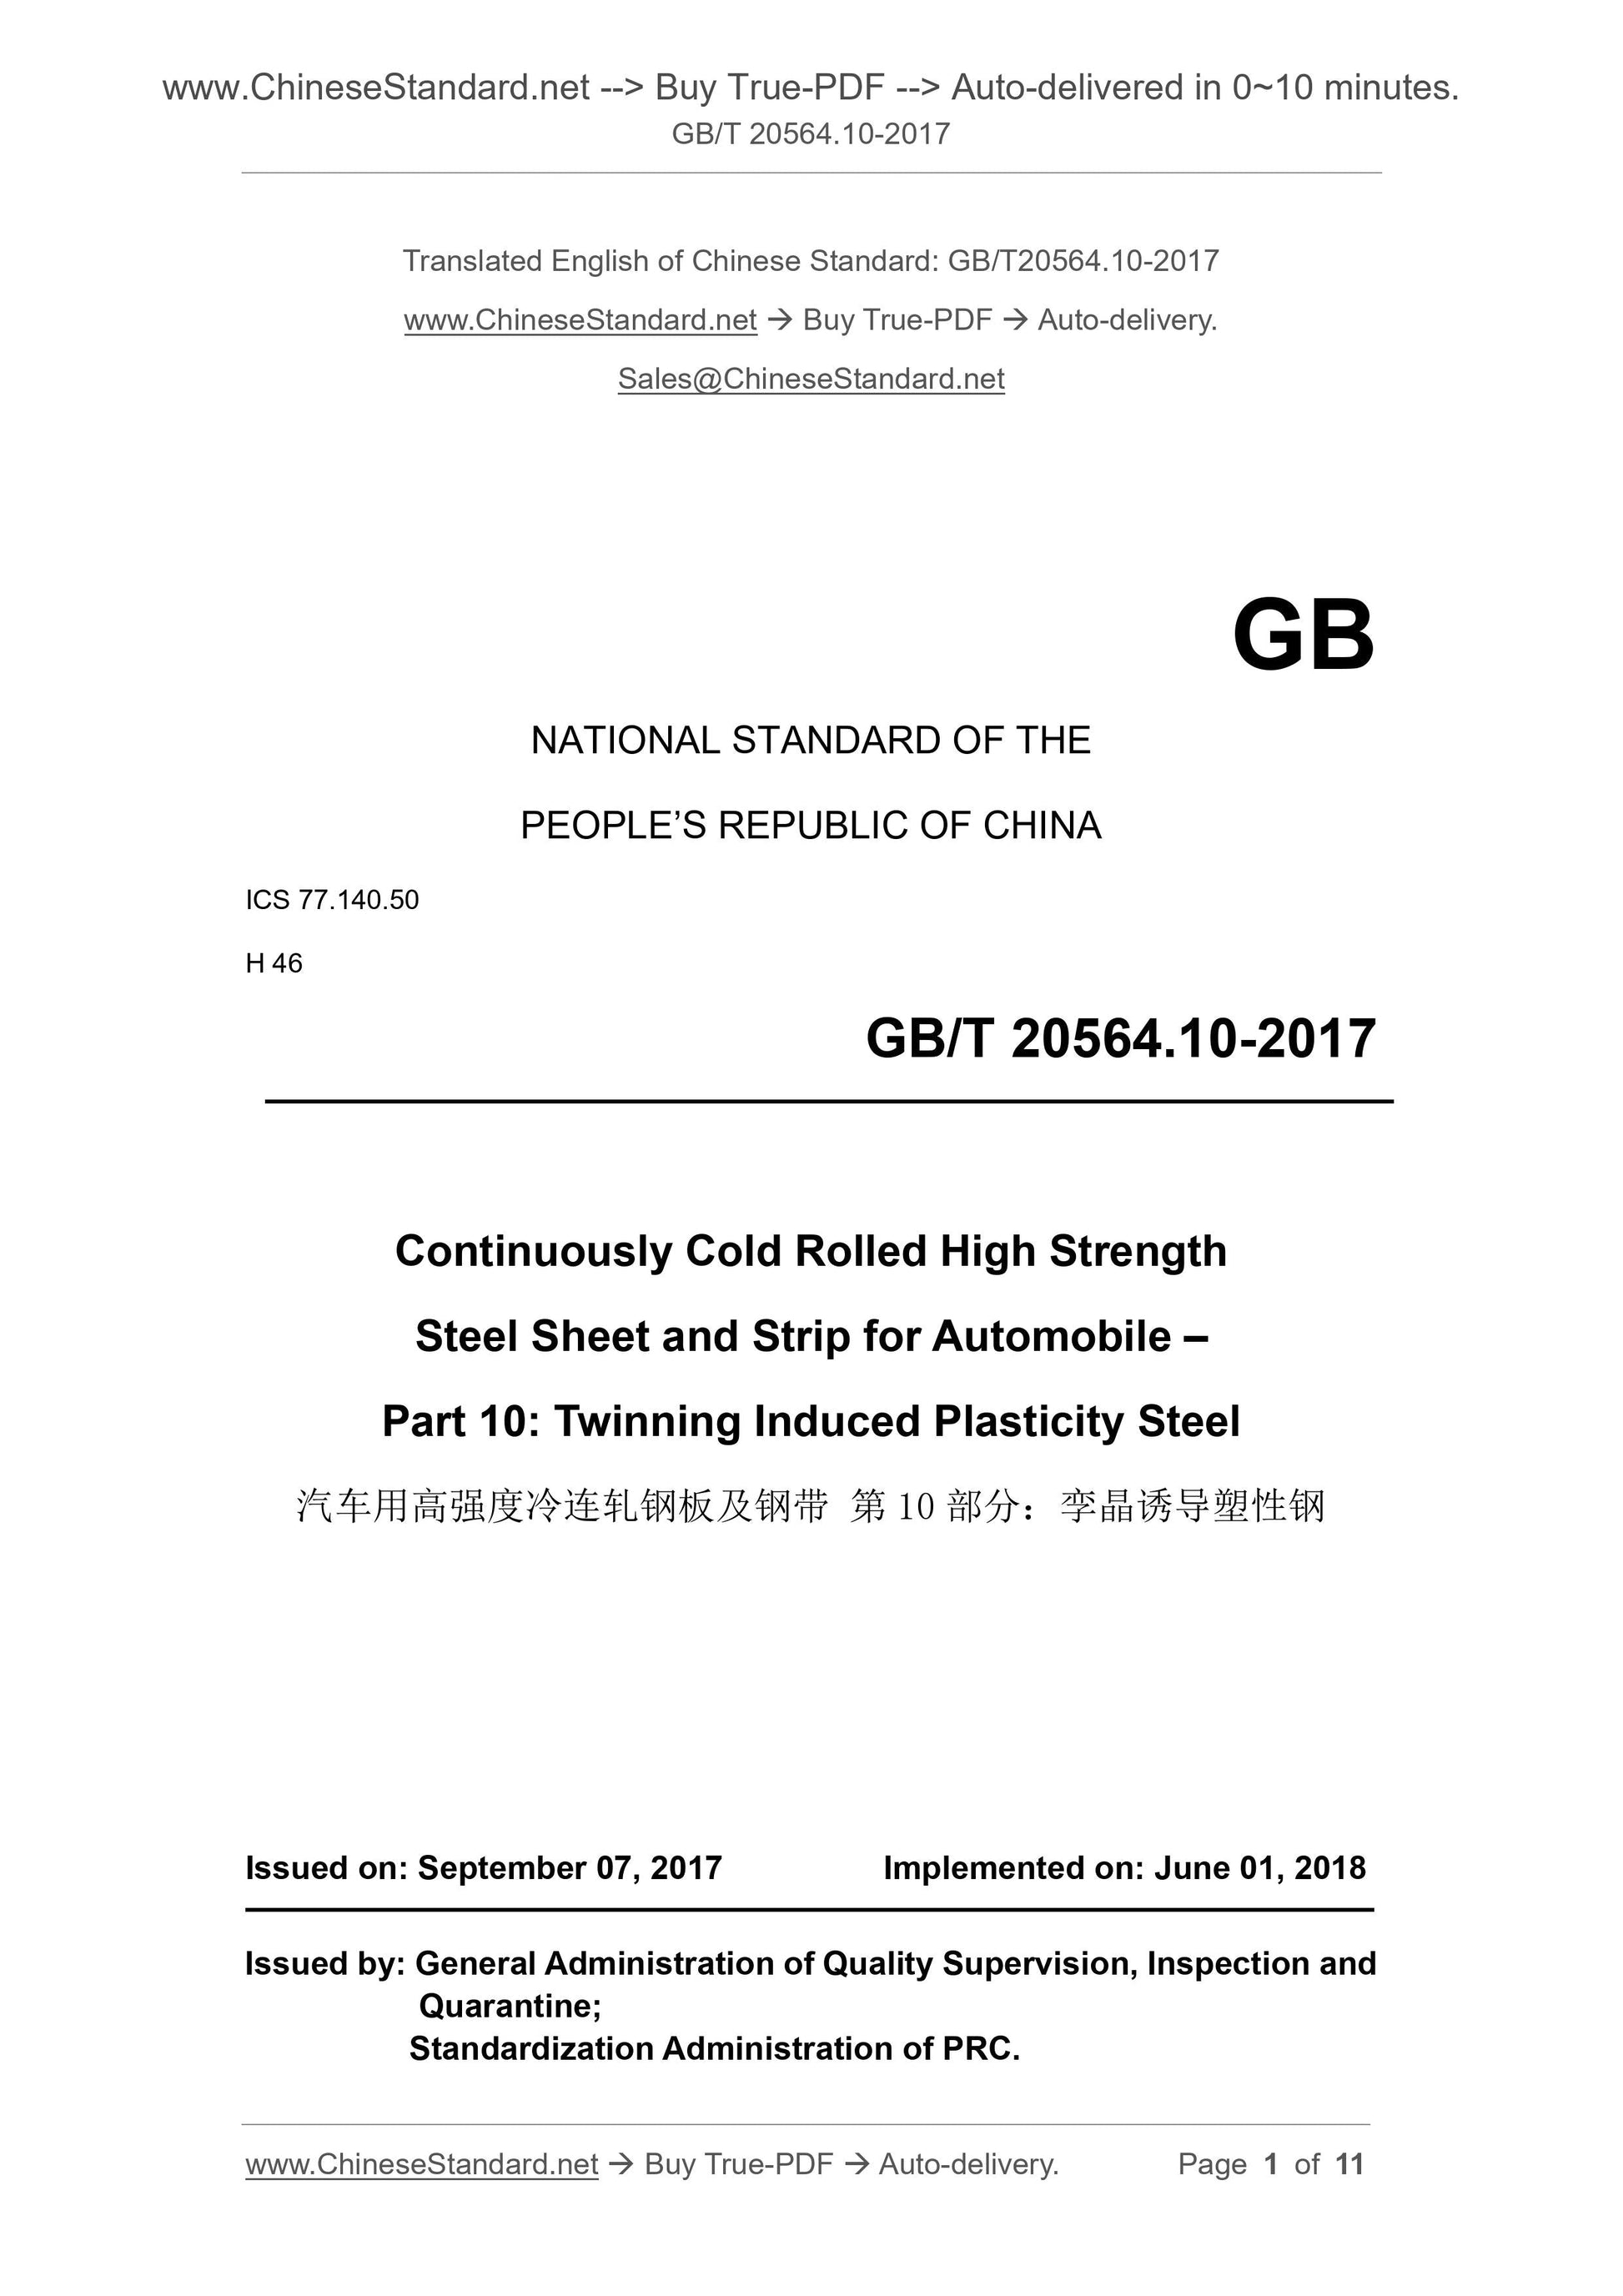 GB/T 20564.10-2017 Page 1